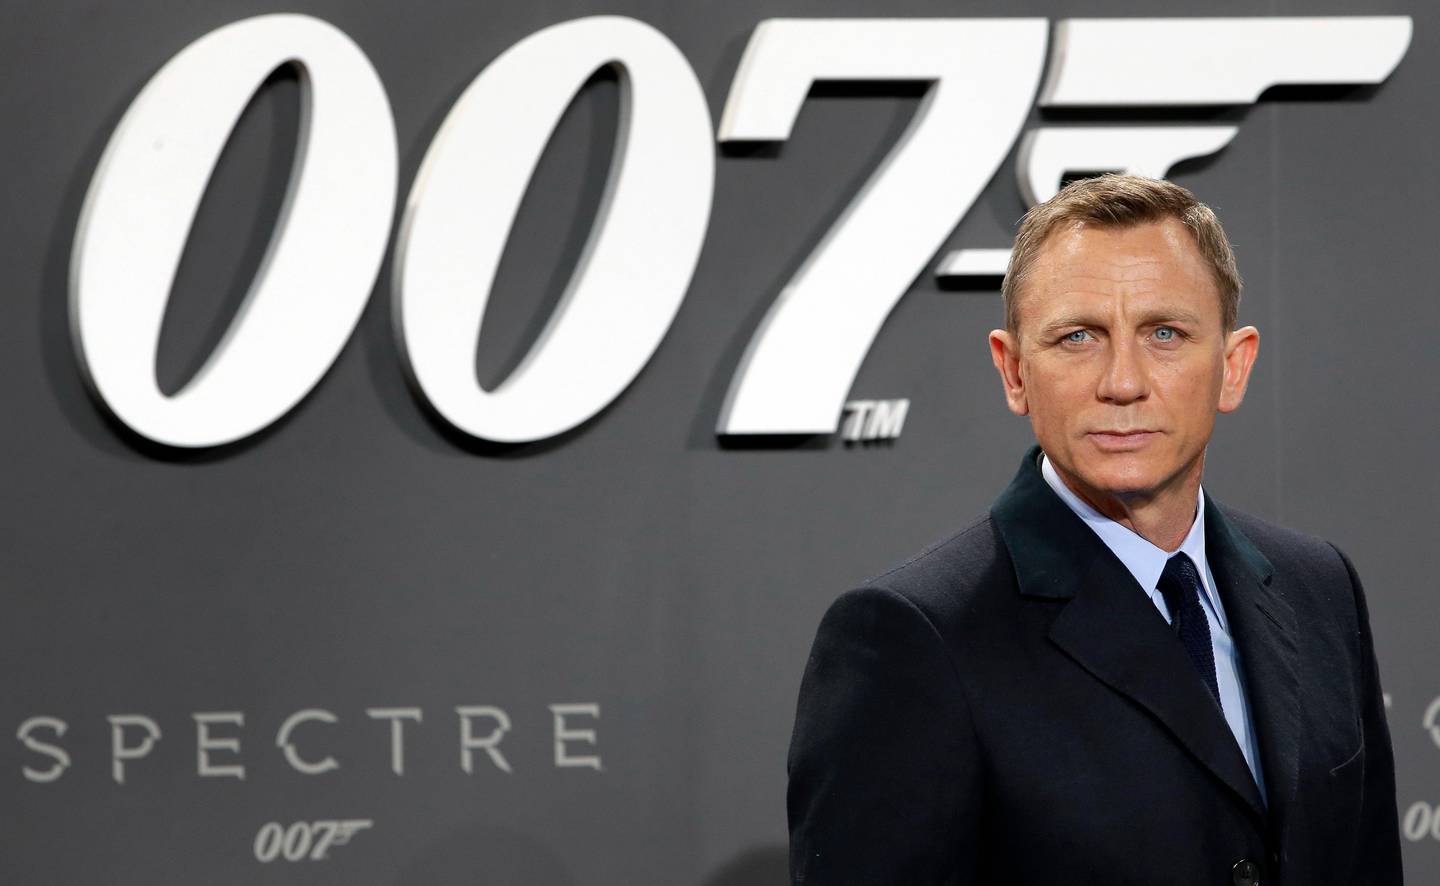 FILE - This is a Wednesday, Oct. 28, 2015 file photo of actor Daniel Craig poses for the media as he arrives for the German premiere of the James Bond movie 'Spectre' in Berlin, Germany. The release of the James Bond film No Time To Die has been pushed back several months because of global concerns about coronavirus. MGM, Universal and producers Michael G. Wilson and Barbara Broccoli announced on Twitter Wednesday that the film would be pushed back from its April release to November 2020.  (AP Photo/Michael Sohn/File)